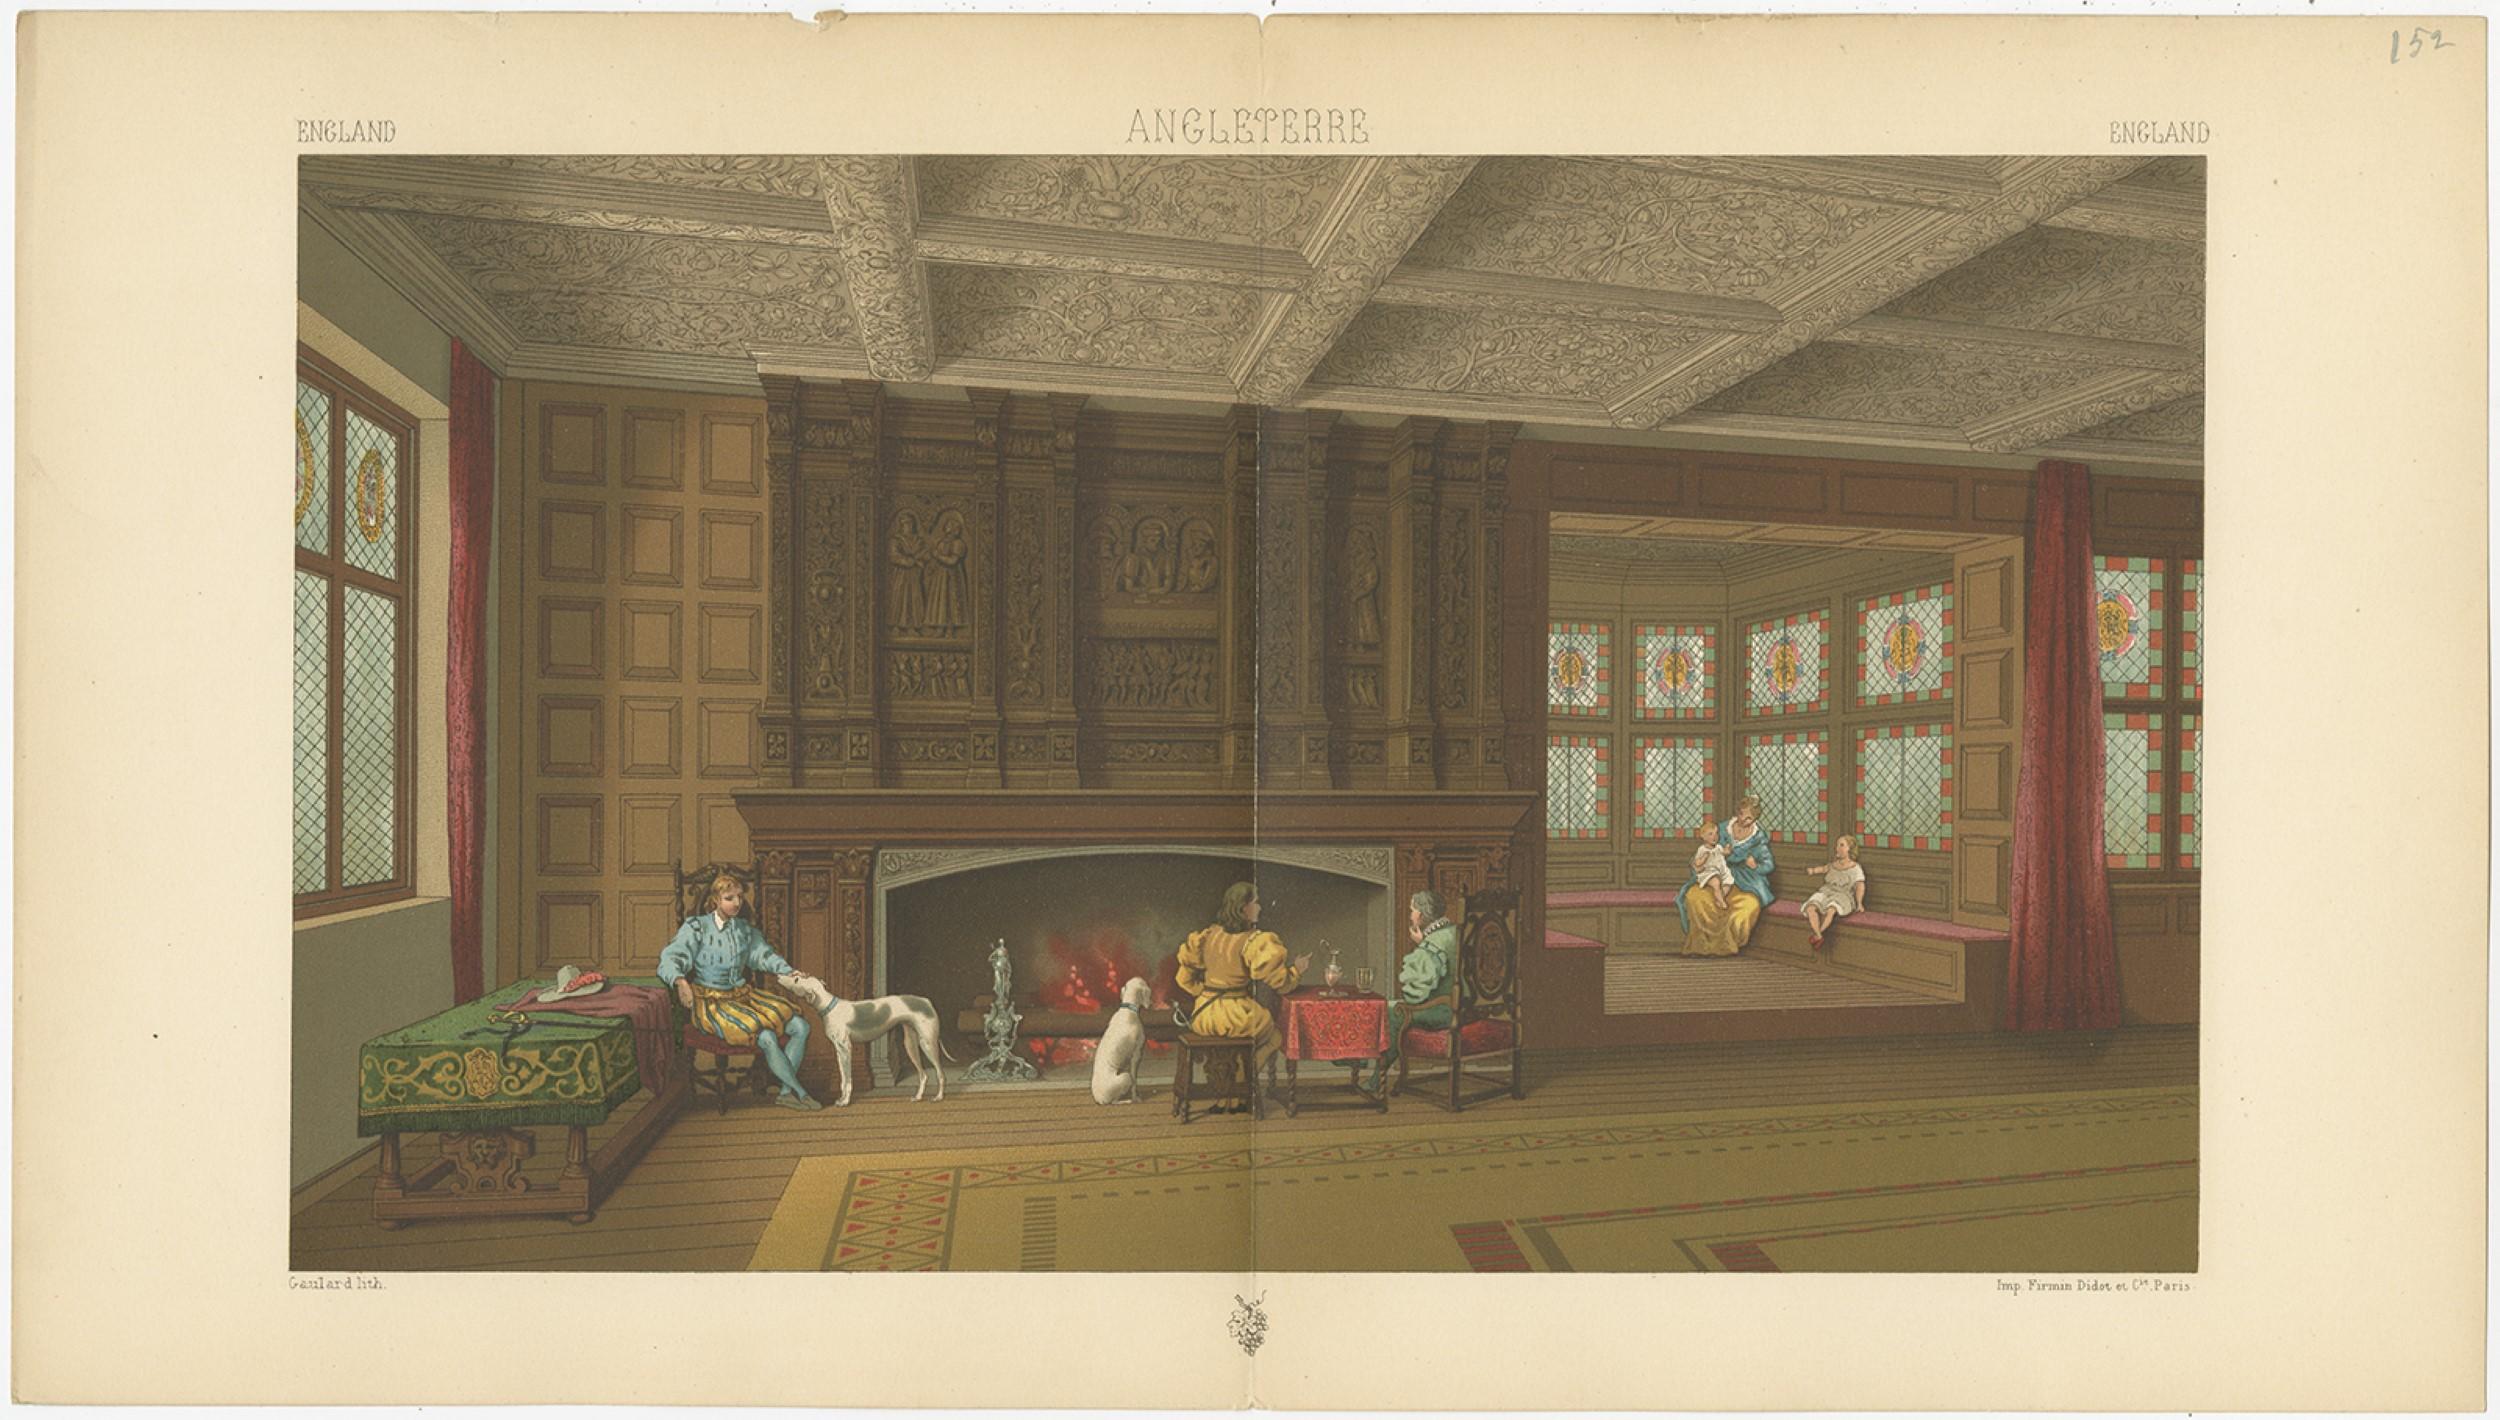 Antique print titled 'England - Angleterre - England'. Chromolithograph of English Fireplace Room. This print originates from 'Le Costume Historique' by M.A. Racinet. Published, circa 1880.

  